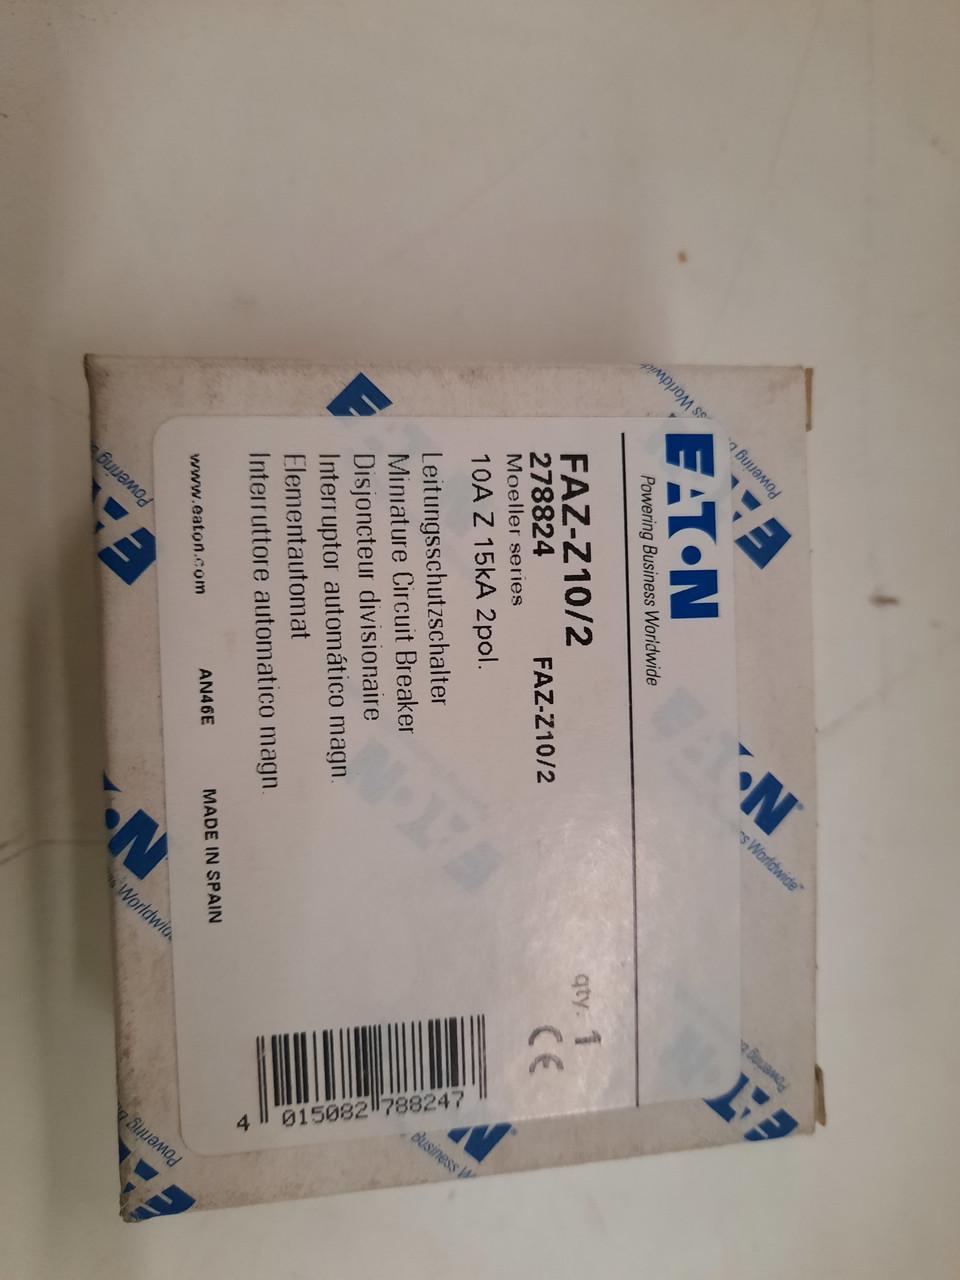 Eaton FAZ-Z10/2 277/480 VAC 50/60 Hz, 10 A, 2-Pole, 10 kA, 2 to 3 x Rated Current, Line/Load Terminal, DIN Rail Mount, Standard Packaging, Z-Curve, Current Limiting, Thermal Magnetic